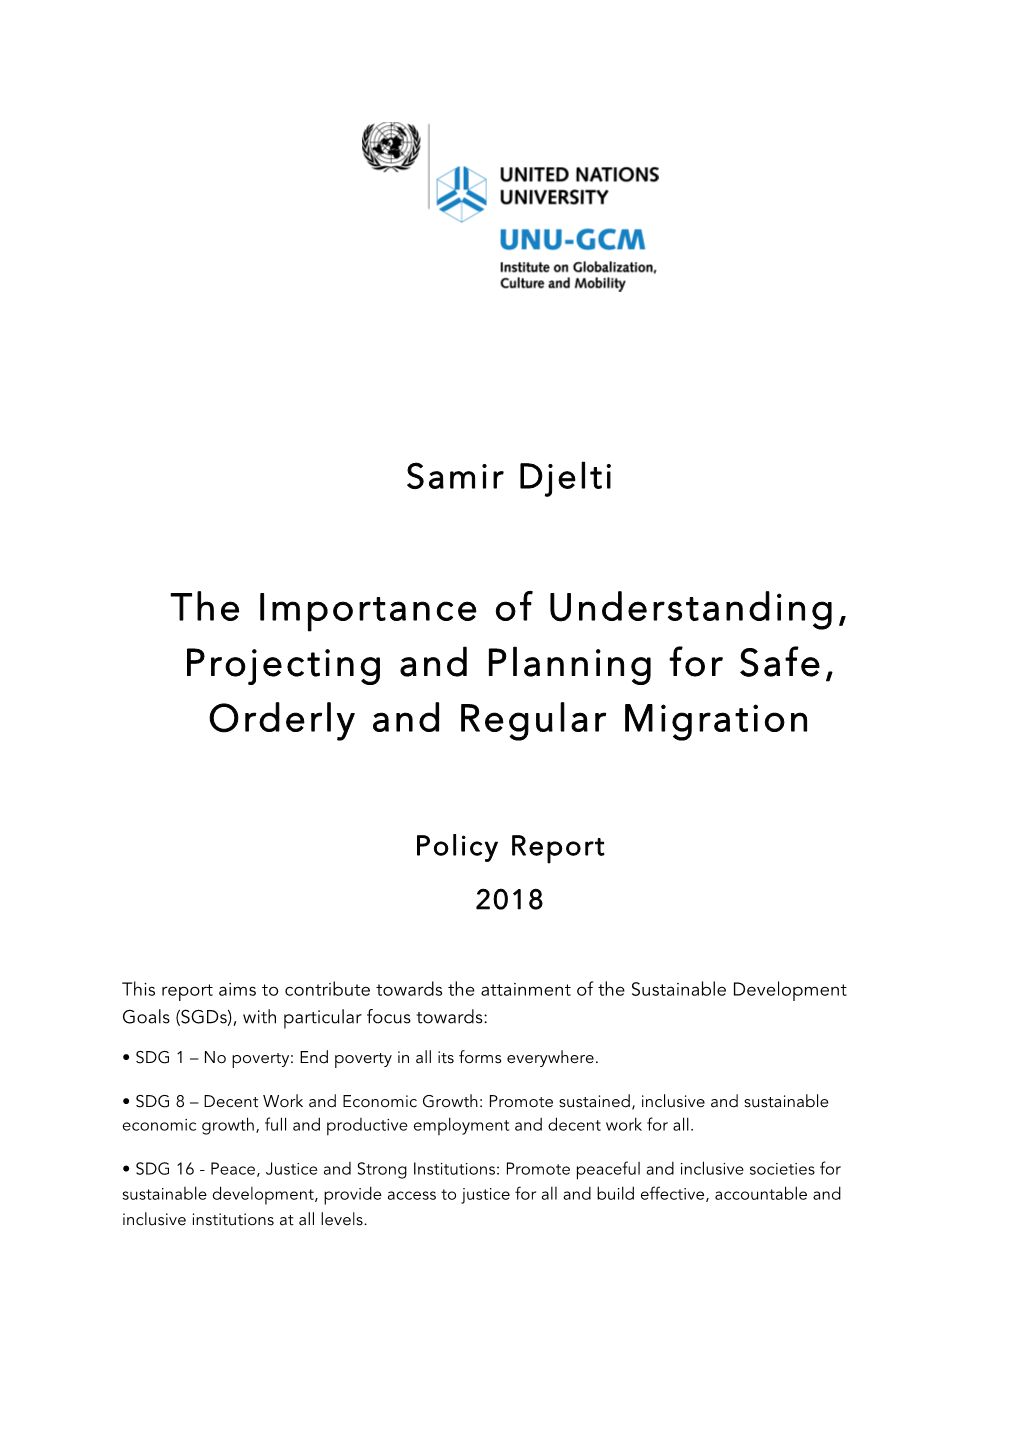 The Importance of Understanding, Projecting and Planning for Safe, Orderly and Regular Migration